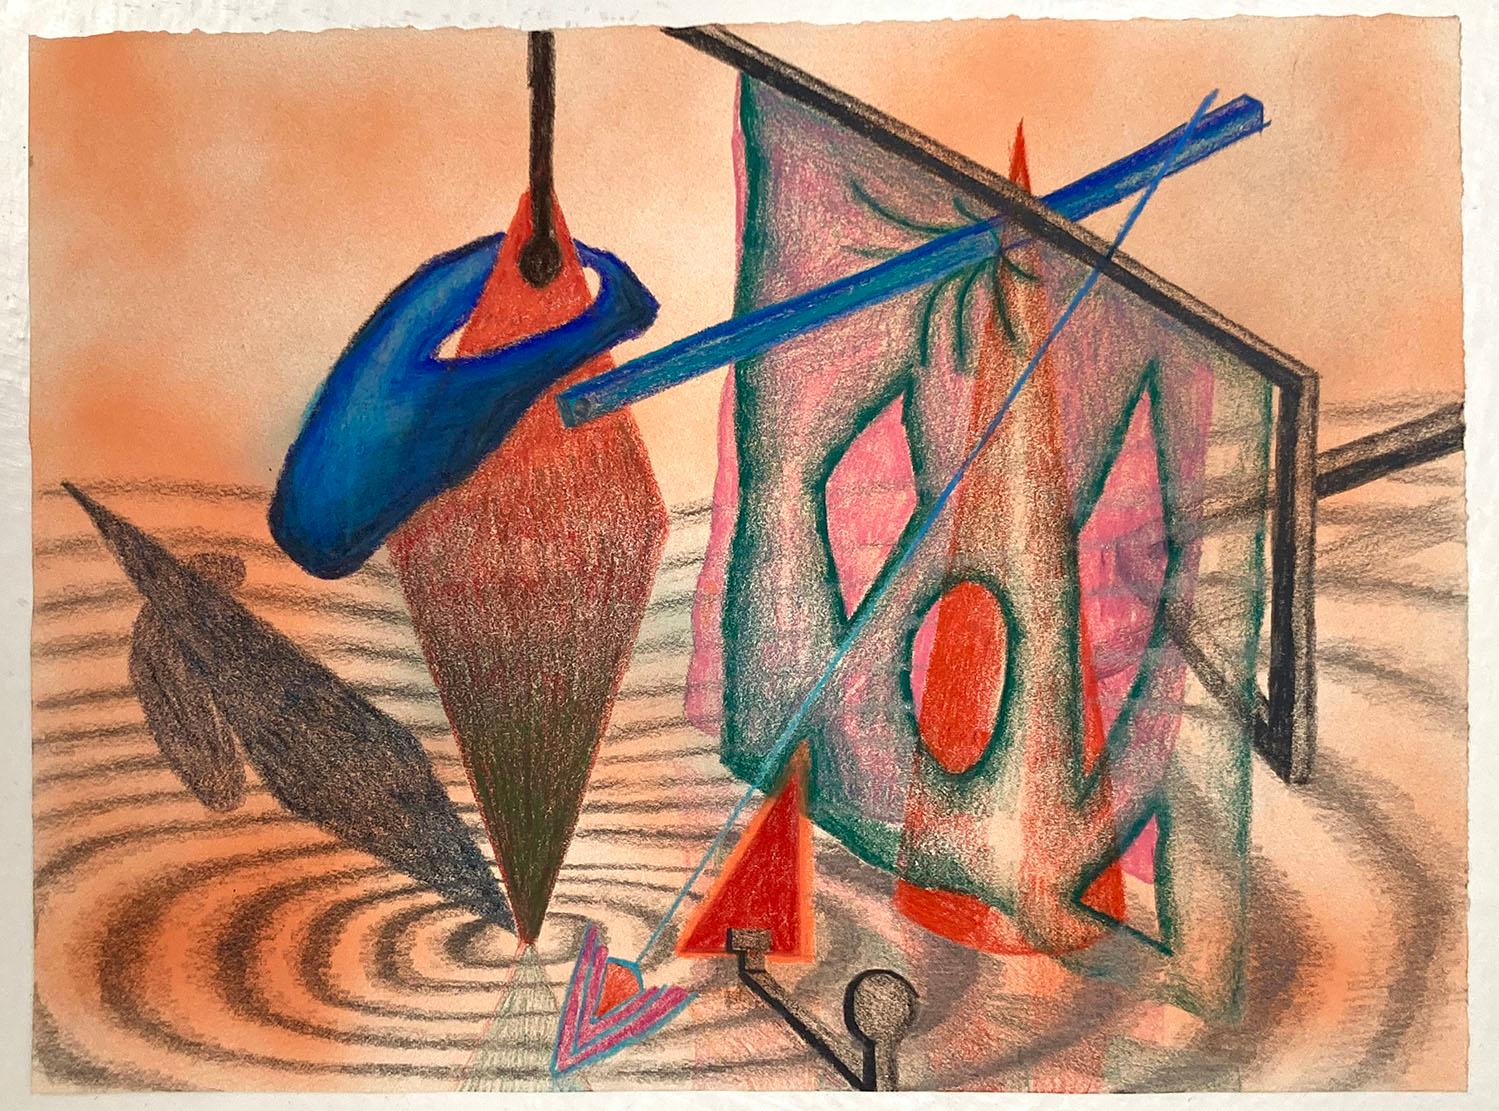 'BASEMENT, AVAILABLE NOW, FULLY FURNISHED', 2020
Colour pencil, spray paint and graphite on handmade paper
Signed and dated
29 x 42 cm

Artist Rita Evans’s imaginative practice is an admixture of autonomous practice, creative improvisation and an